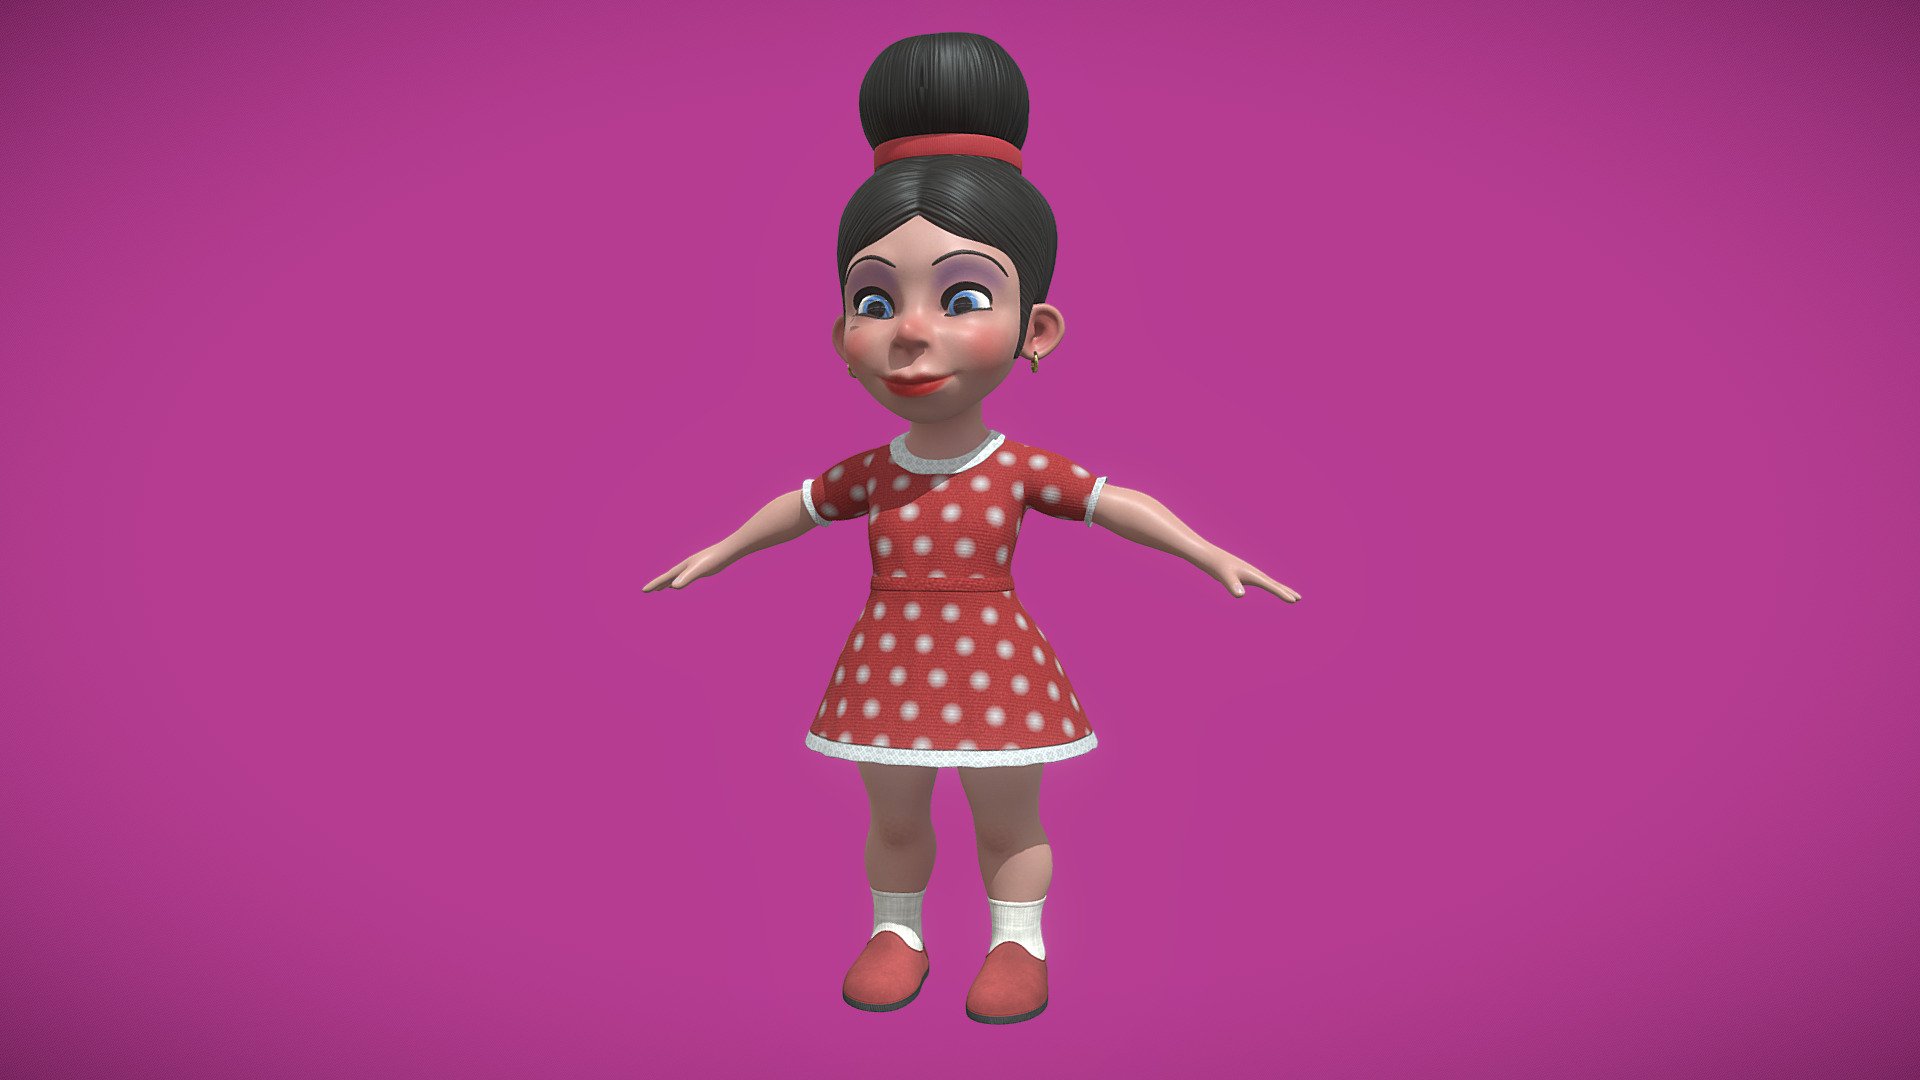 Subscribe to my youtube channel:
https://www.youtube.com/channel/UCZKv7L9XvH2jnnsVqFzP96g - Baby Female - Download Free 3D model by emelyarules 3d model